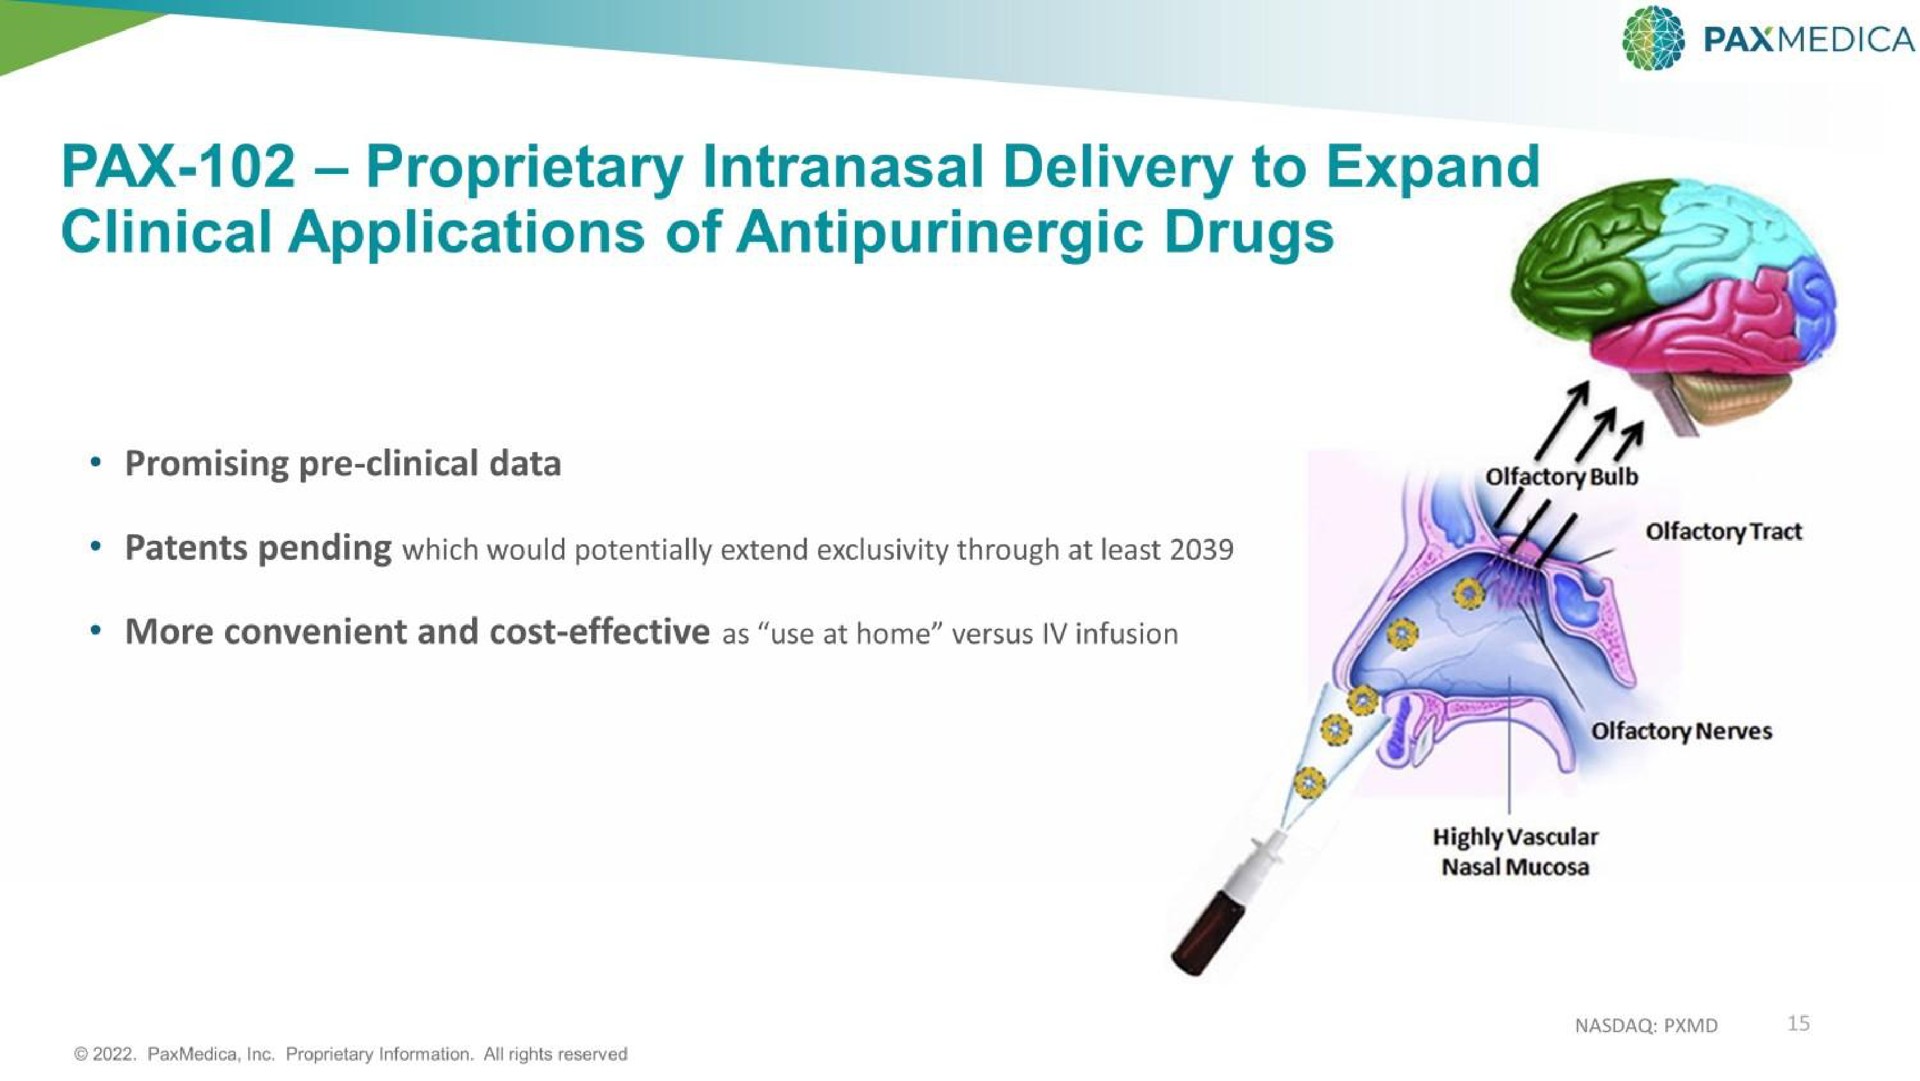 me pax proprietary intranasal delivery to expand clinical applications of drugs | PaxMedica